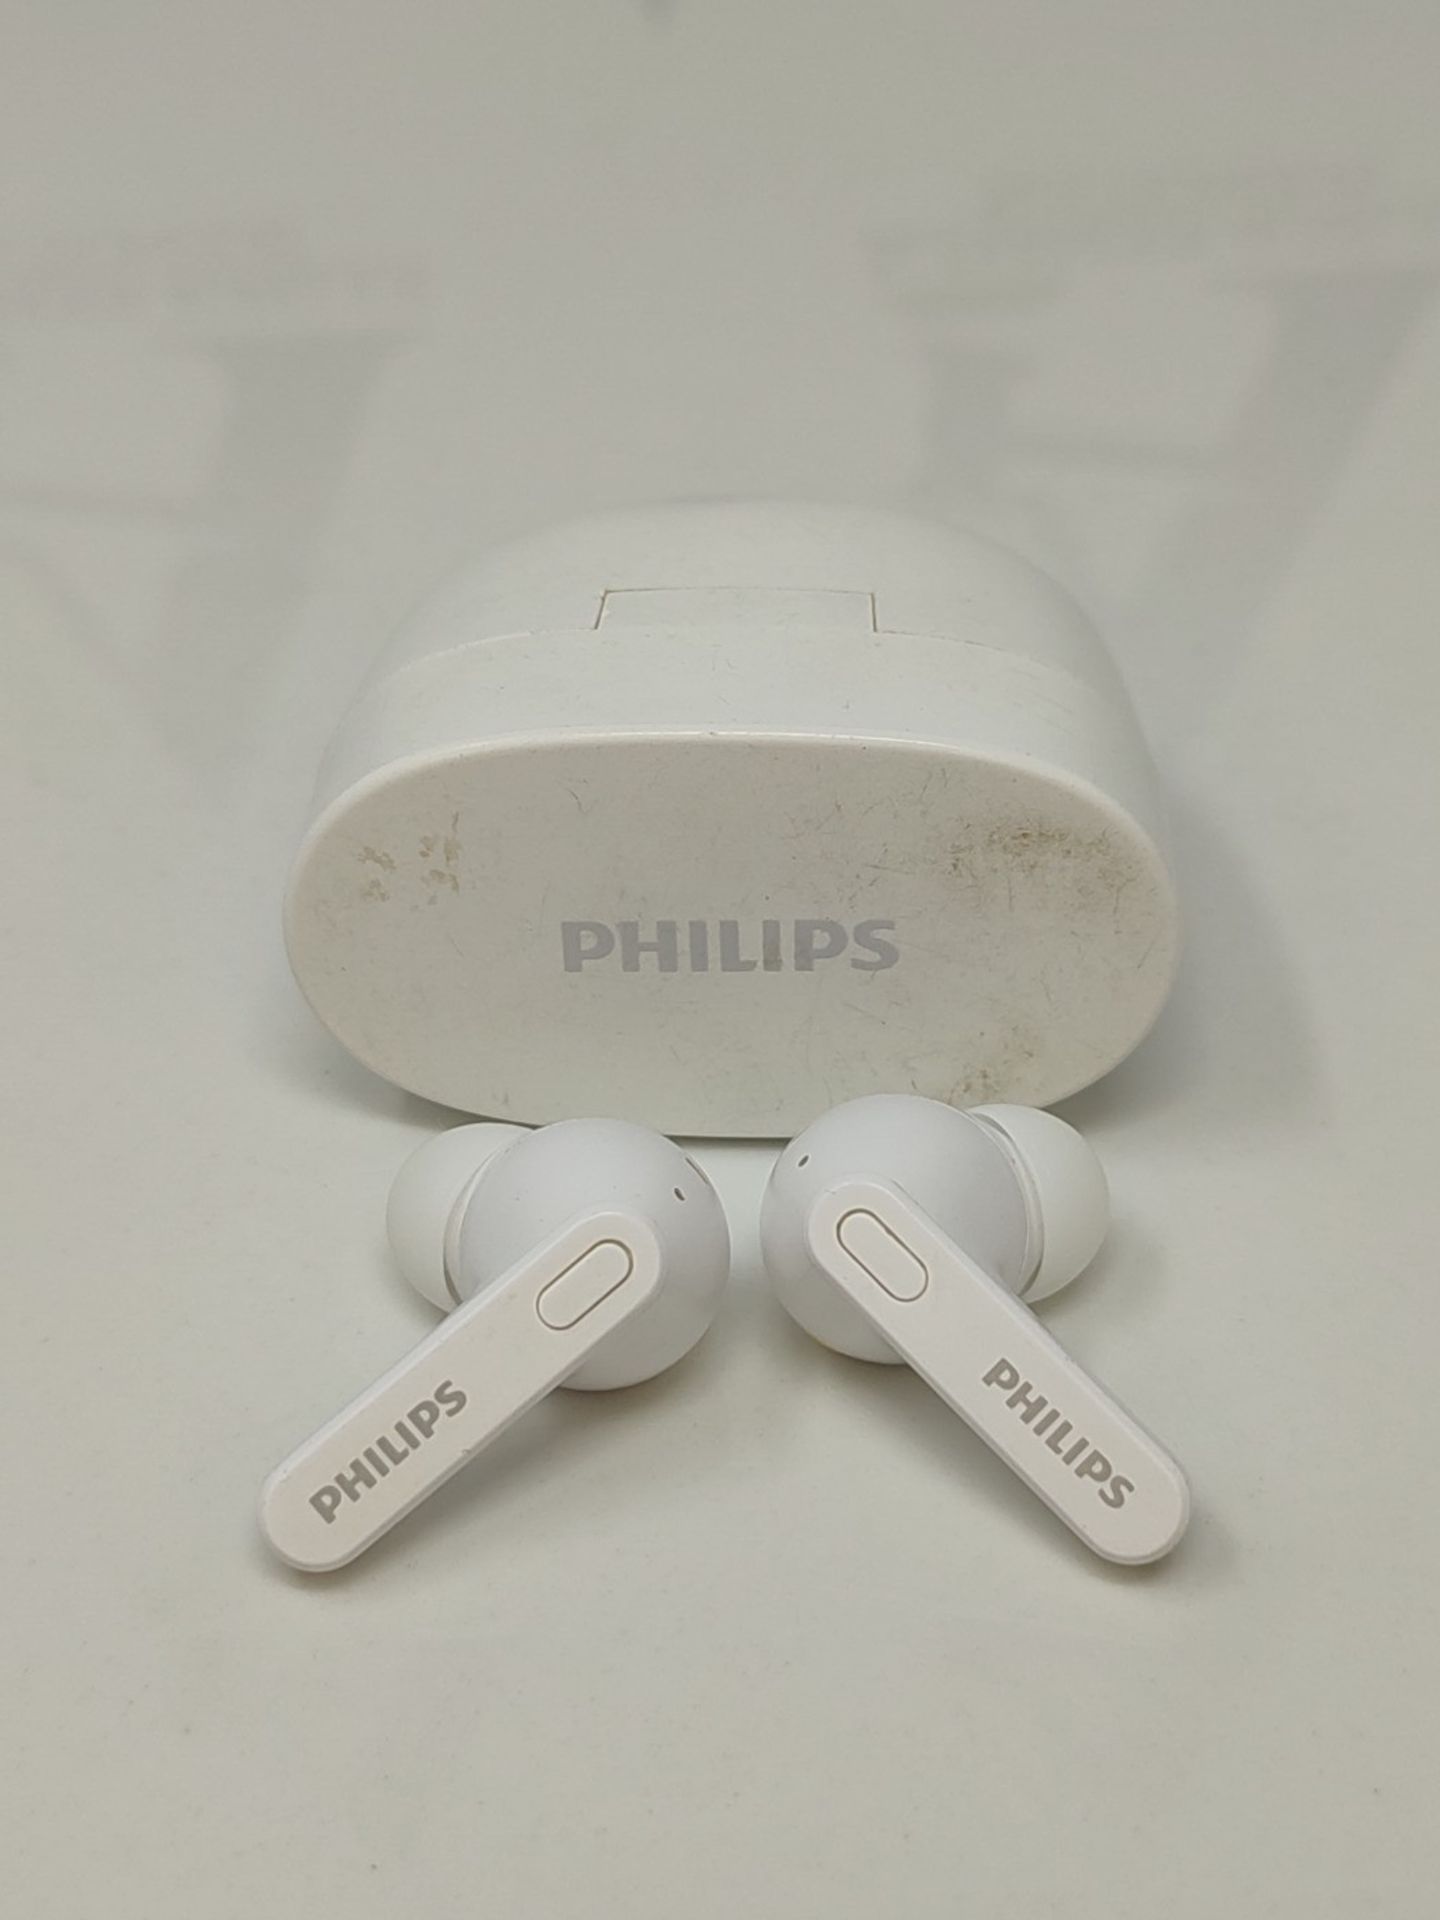 PHILIPS Bluetooth Earphones with Wireless Microphone, Sweat-Resistant, 18 Hours of Pla - Image 3 of 3